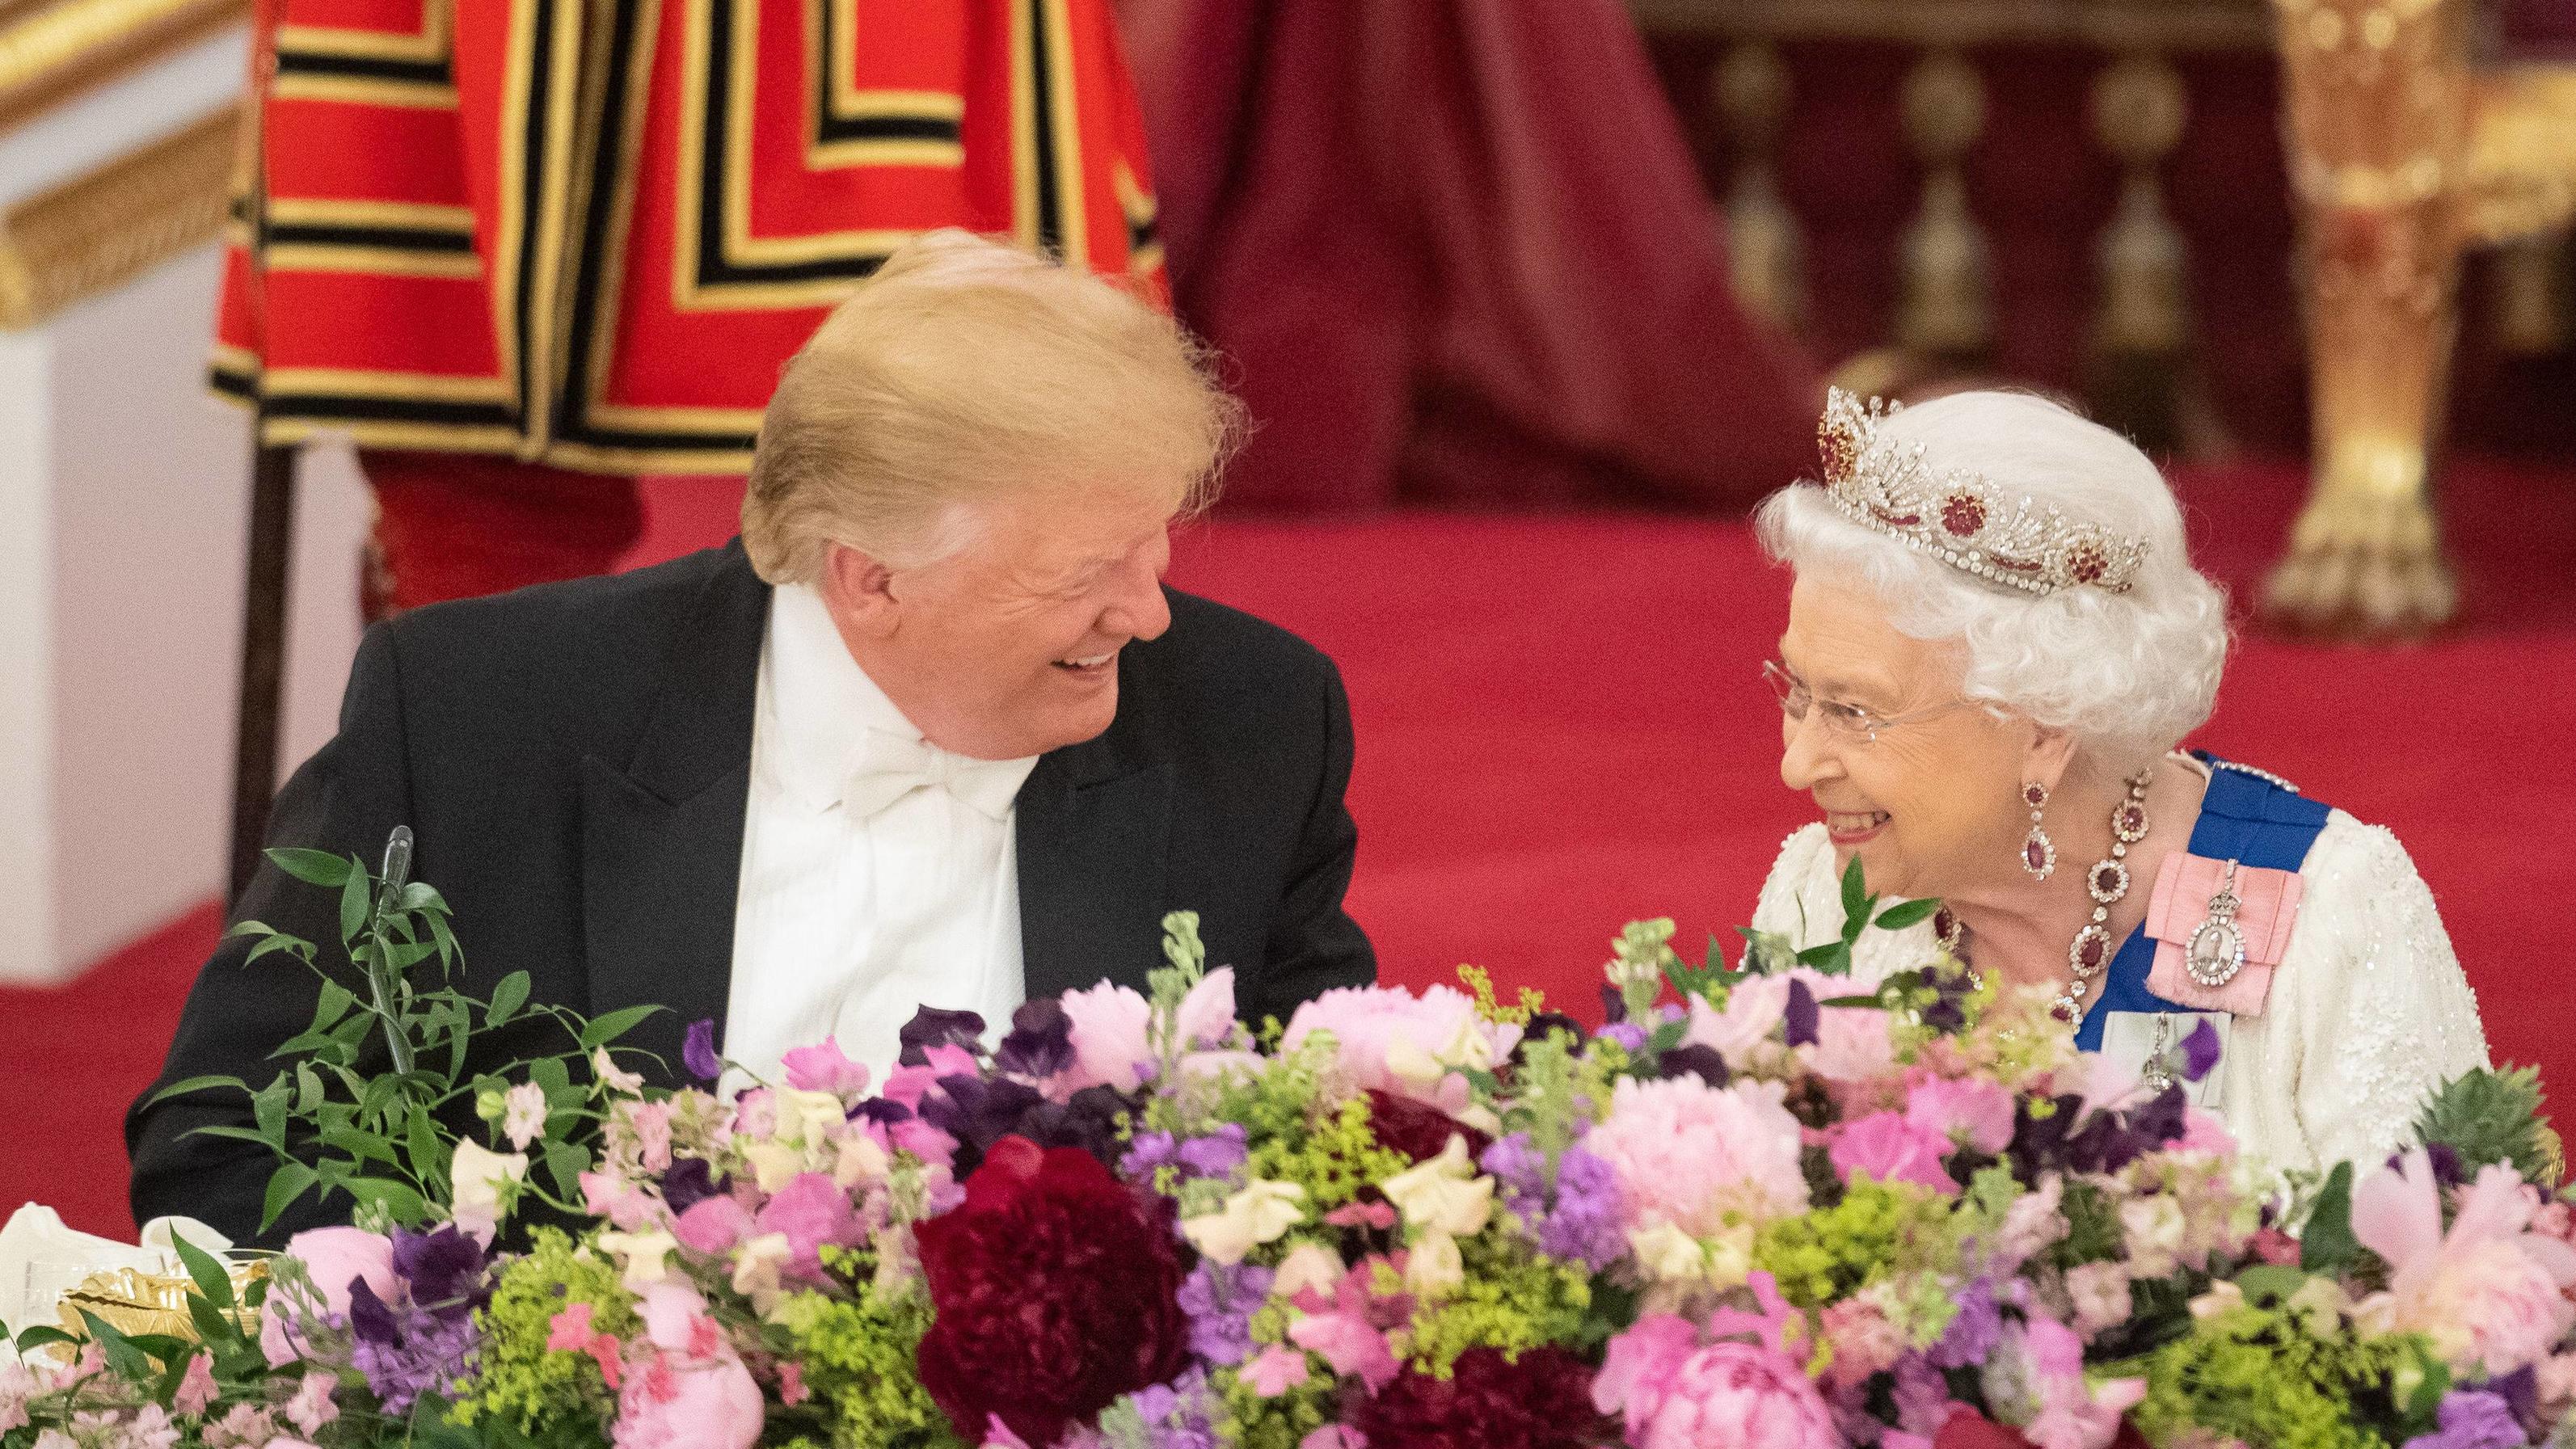 . 03/06/2019. London, United Kingdom. Queen Elizabeth II and President Trump at a State Banquet at Buckingham Palace in London on the first day of the PresidentÕs State Visit to the UK PUBLICATIONxINxGERxSUIxAUTxHUNxONLY xi-Imagesx/xPoolx IIM-19752-0